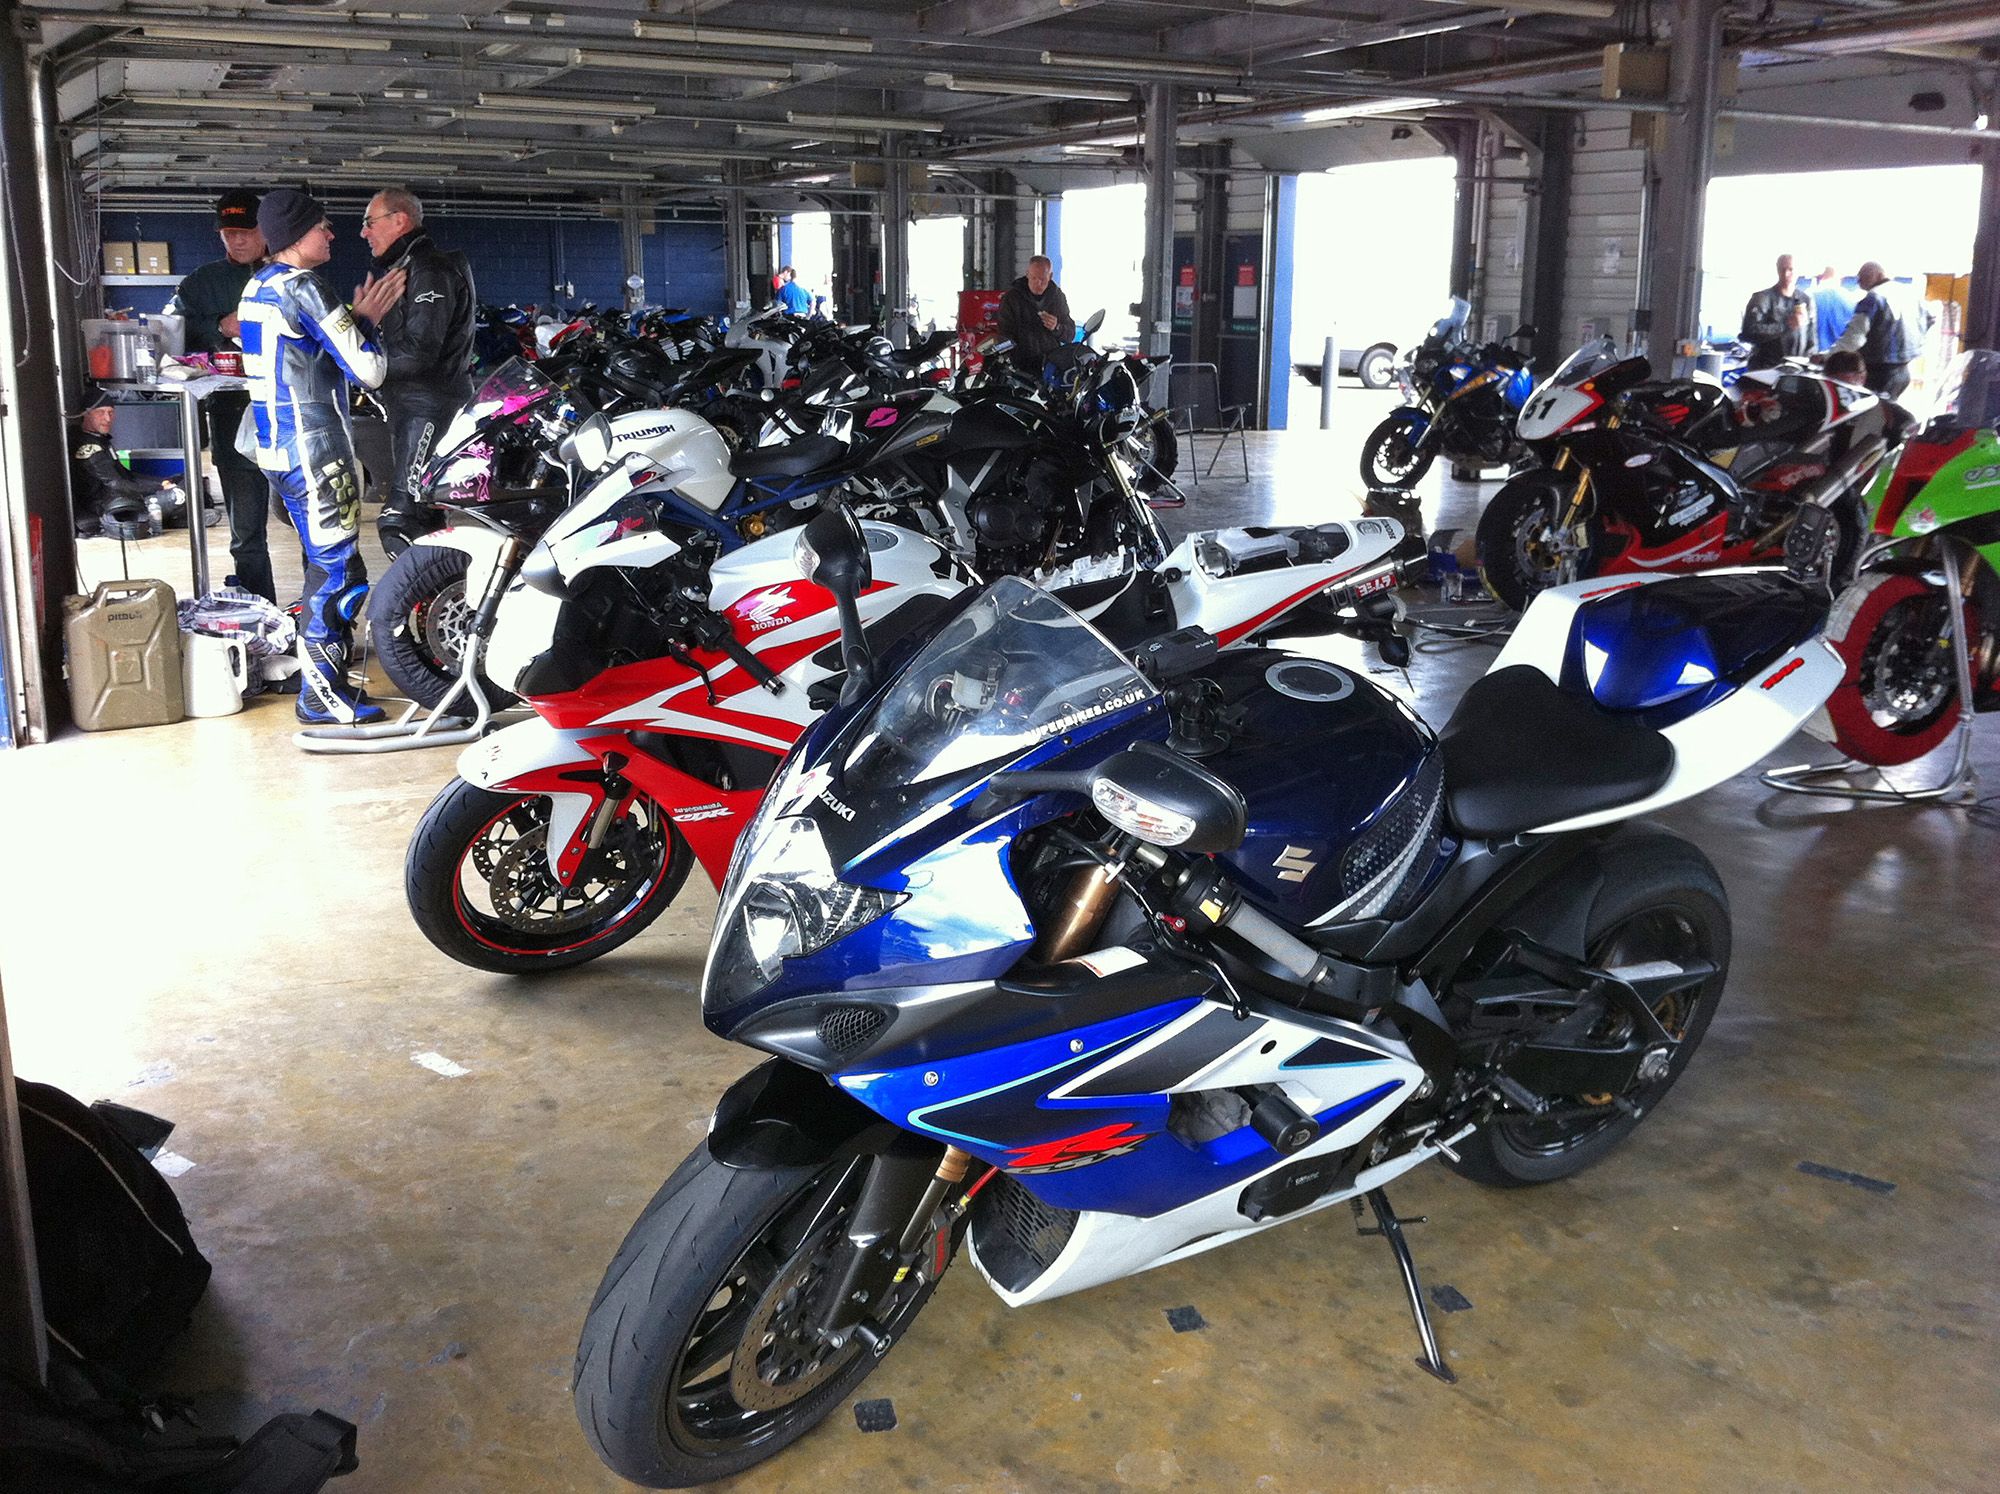 Trackday Pit Garage full of motorcycles